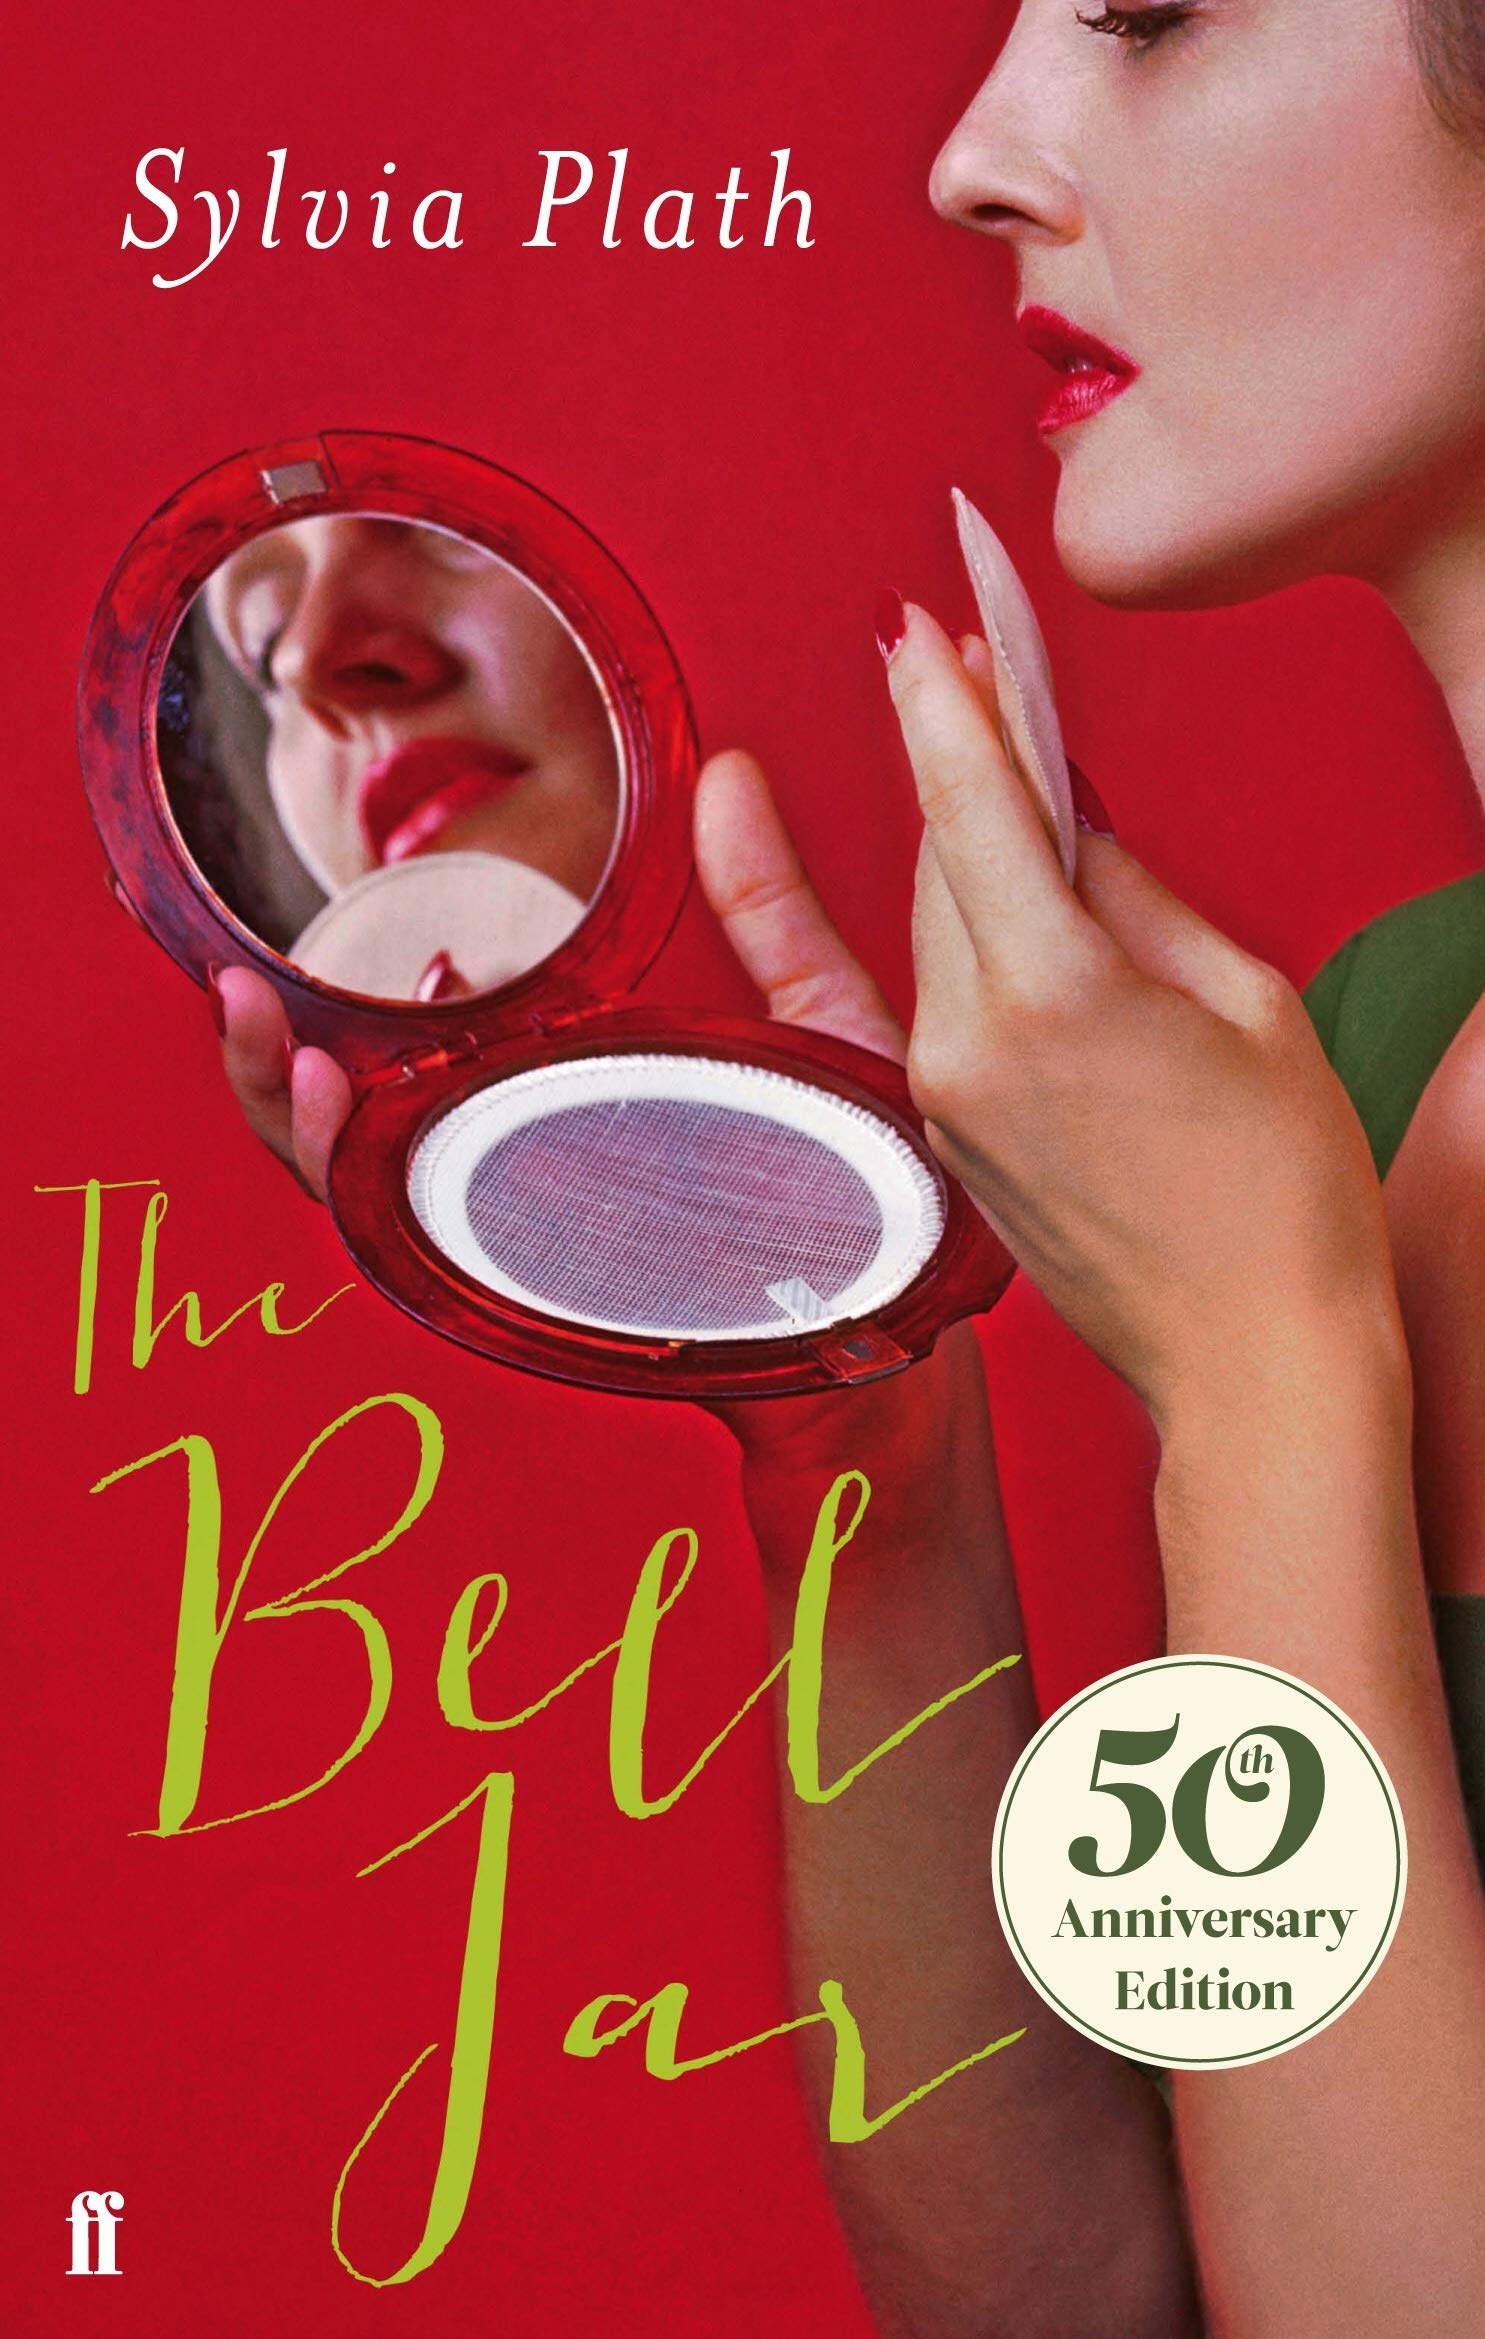 Cover of The Bell Jar with a woman applying make up 